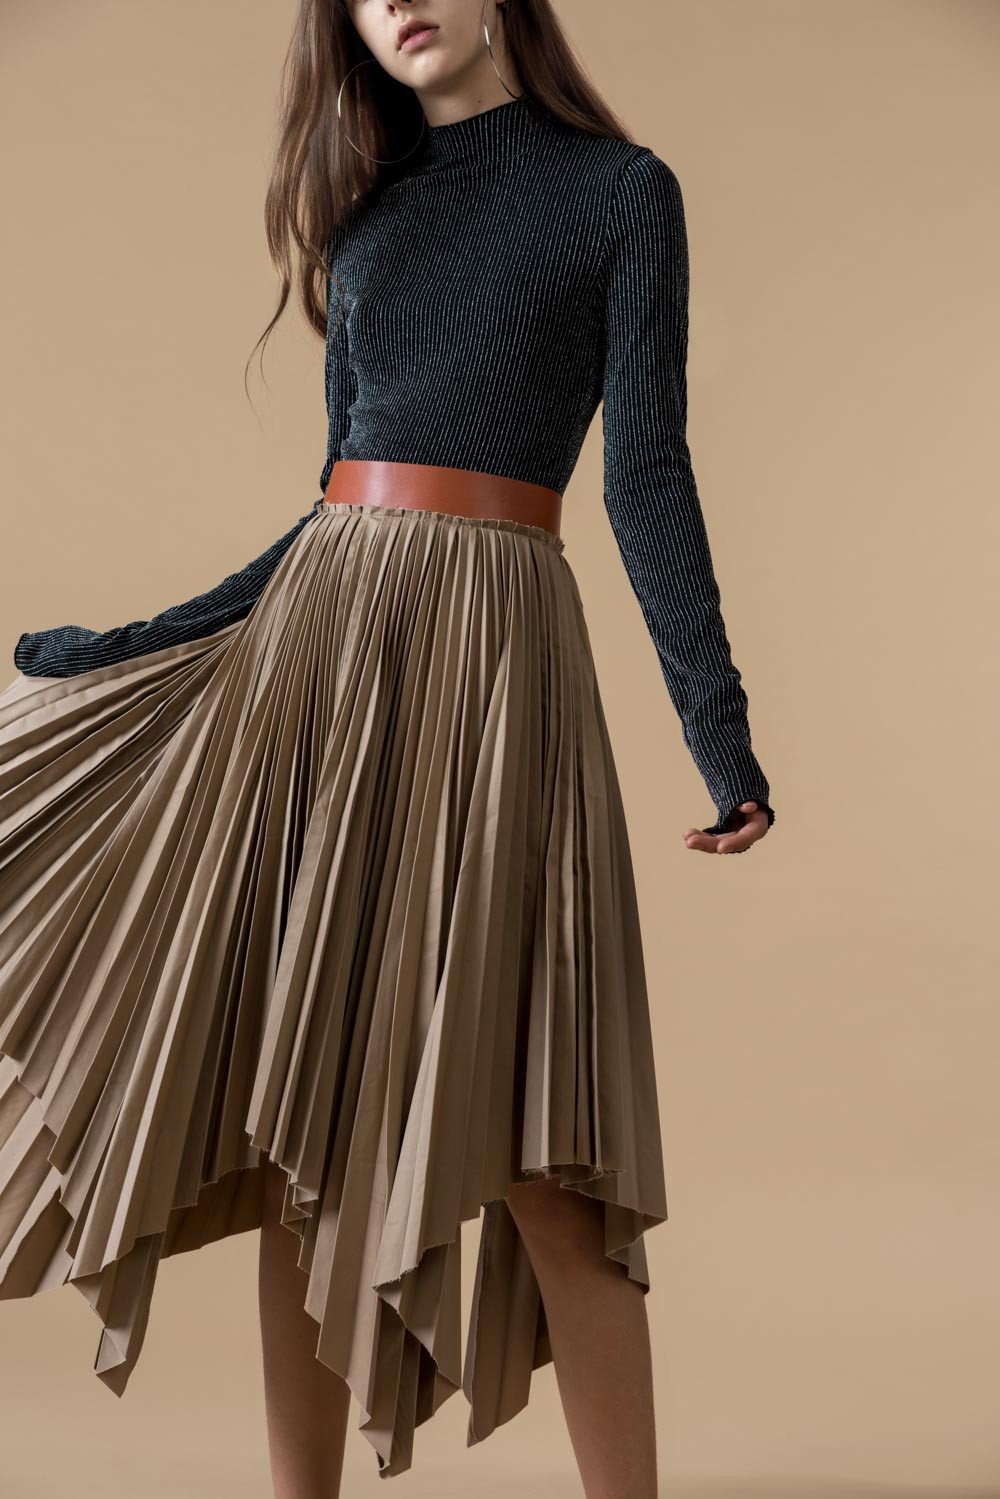 belted pleated skirt oeuzfwn